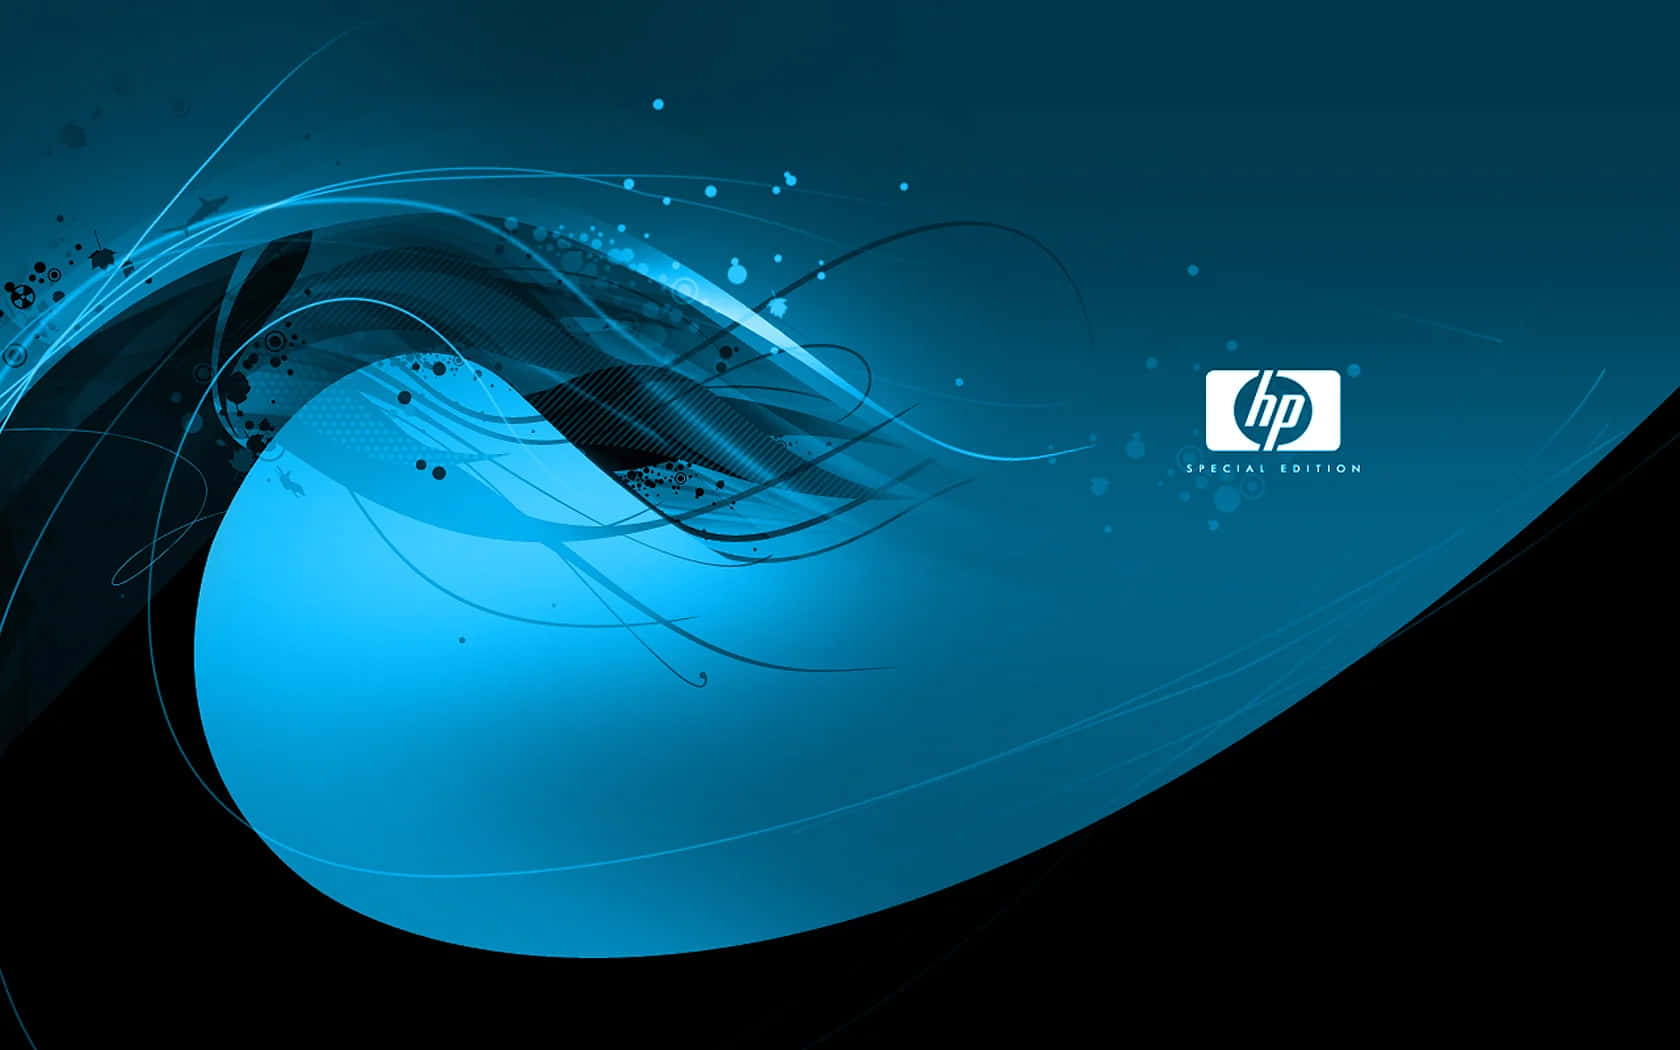 Take Charge of Your Future with HP Technology